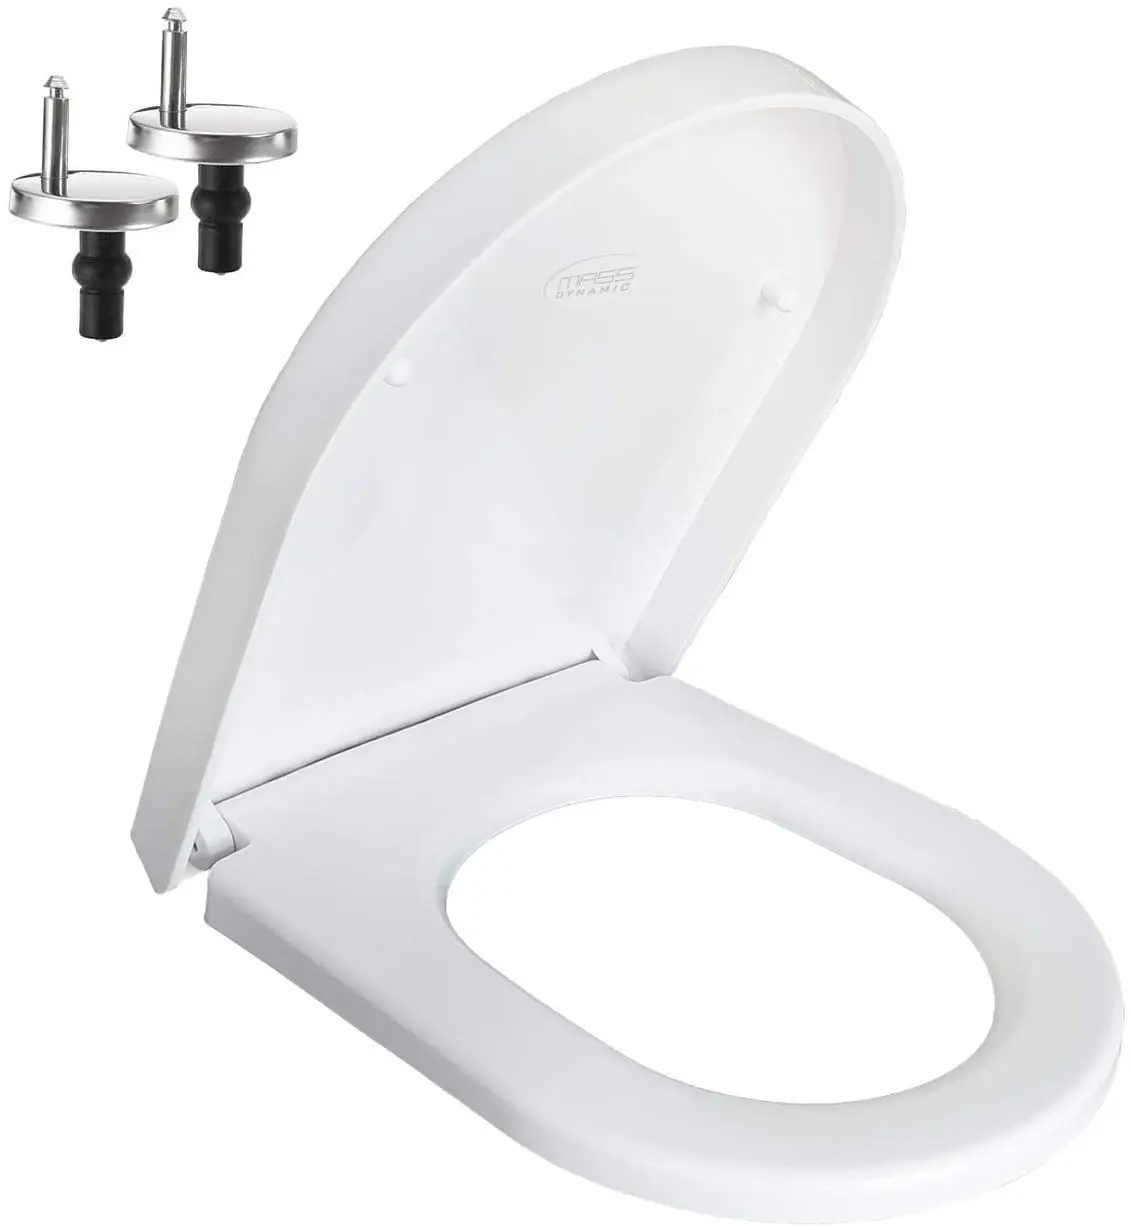 Luxury Toilet Seat Soft Close Easy Clean Quick Release Top Fitting Hinges White 